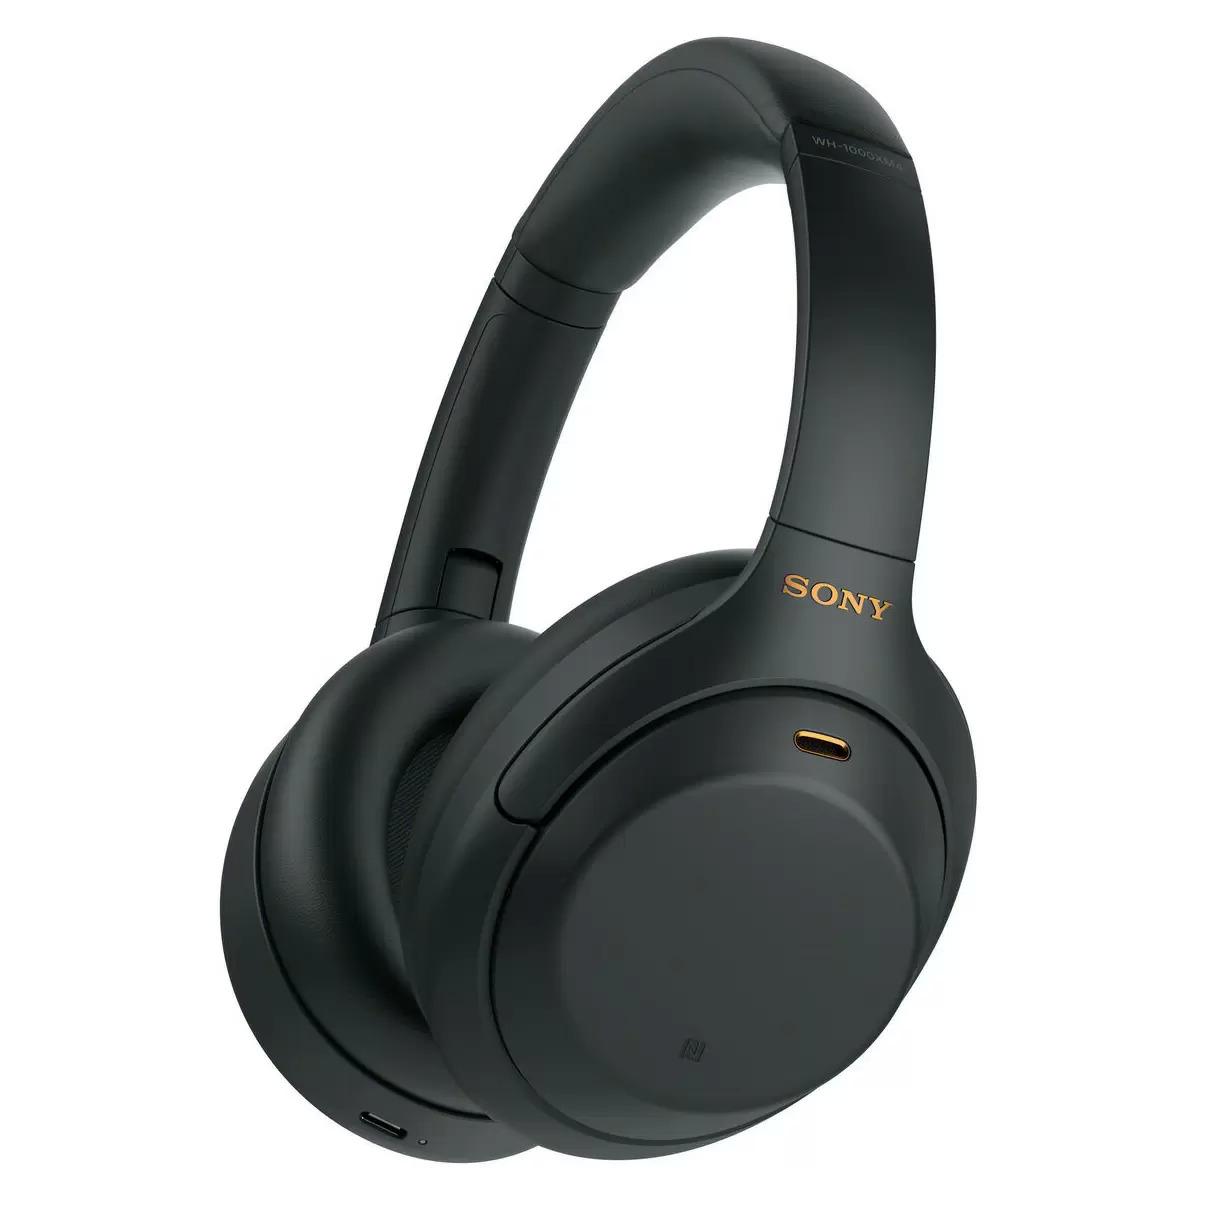 Sony WH-1000XM4 Wireless Noise Cancelling Over Ear Headphones for $152.99 Shipped